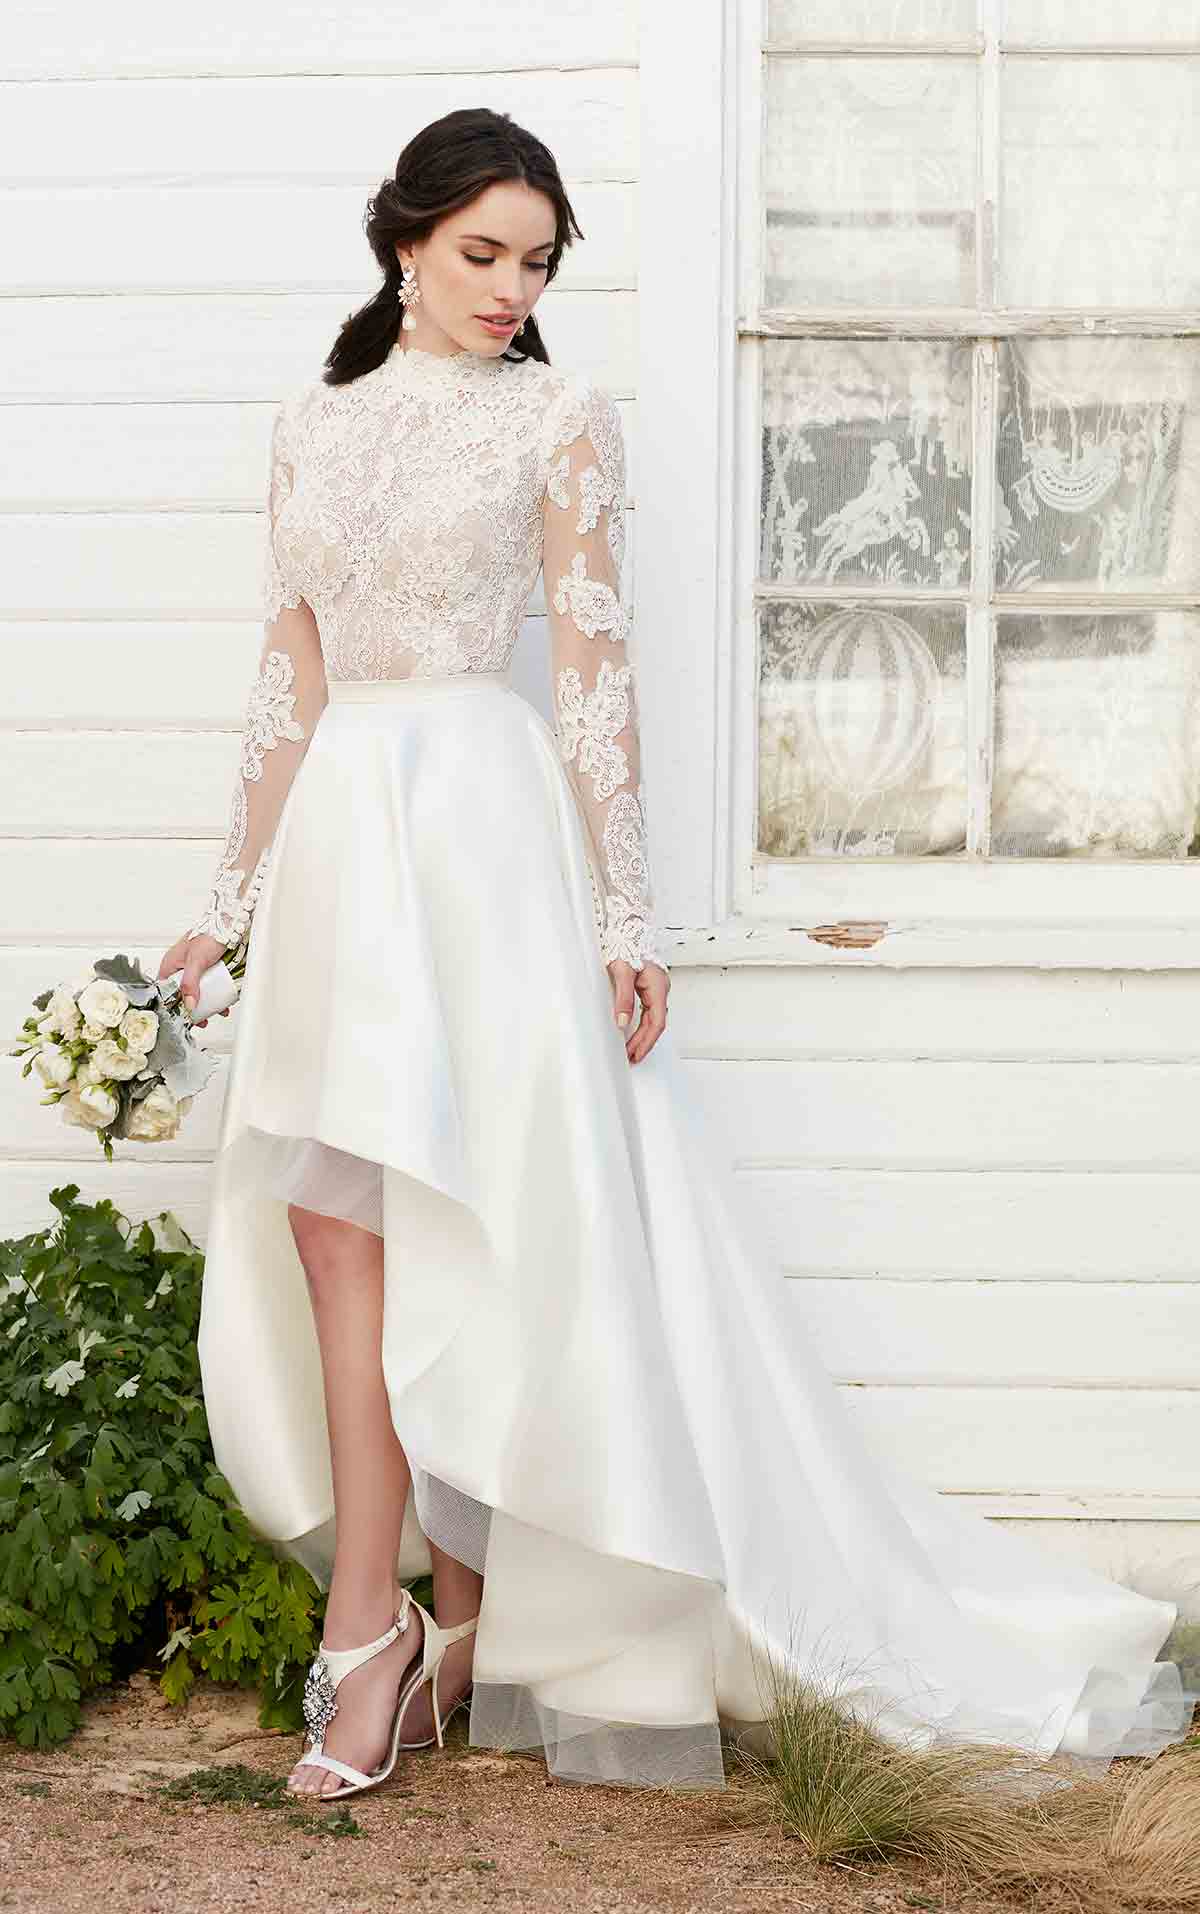 A high low wedding gown with long sleeves